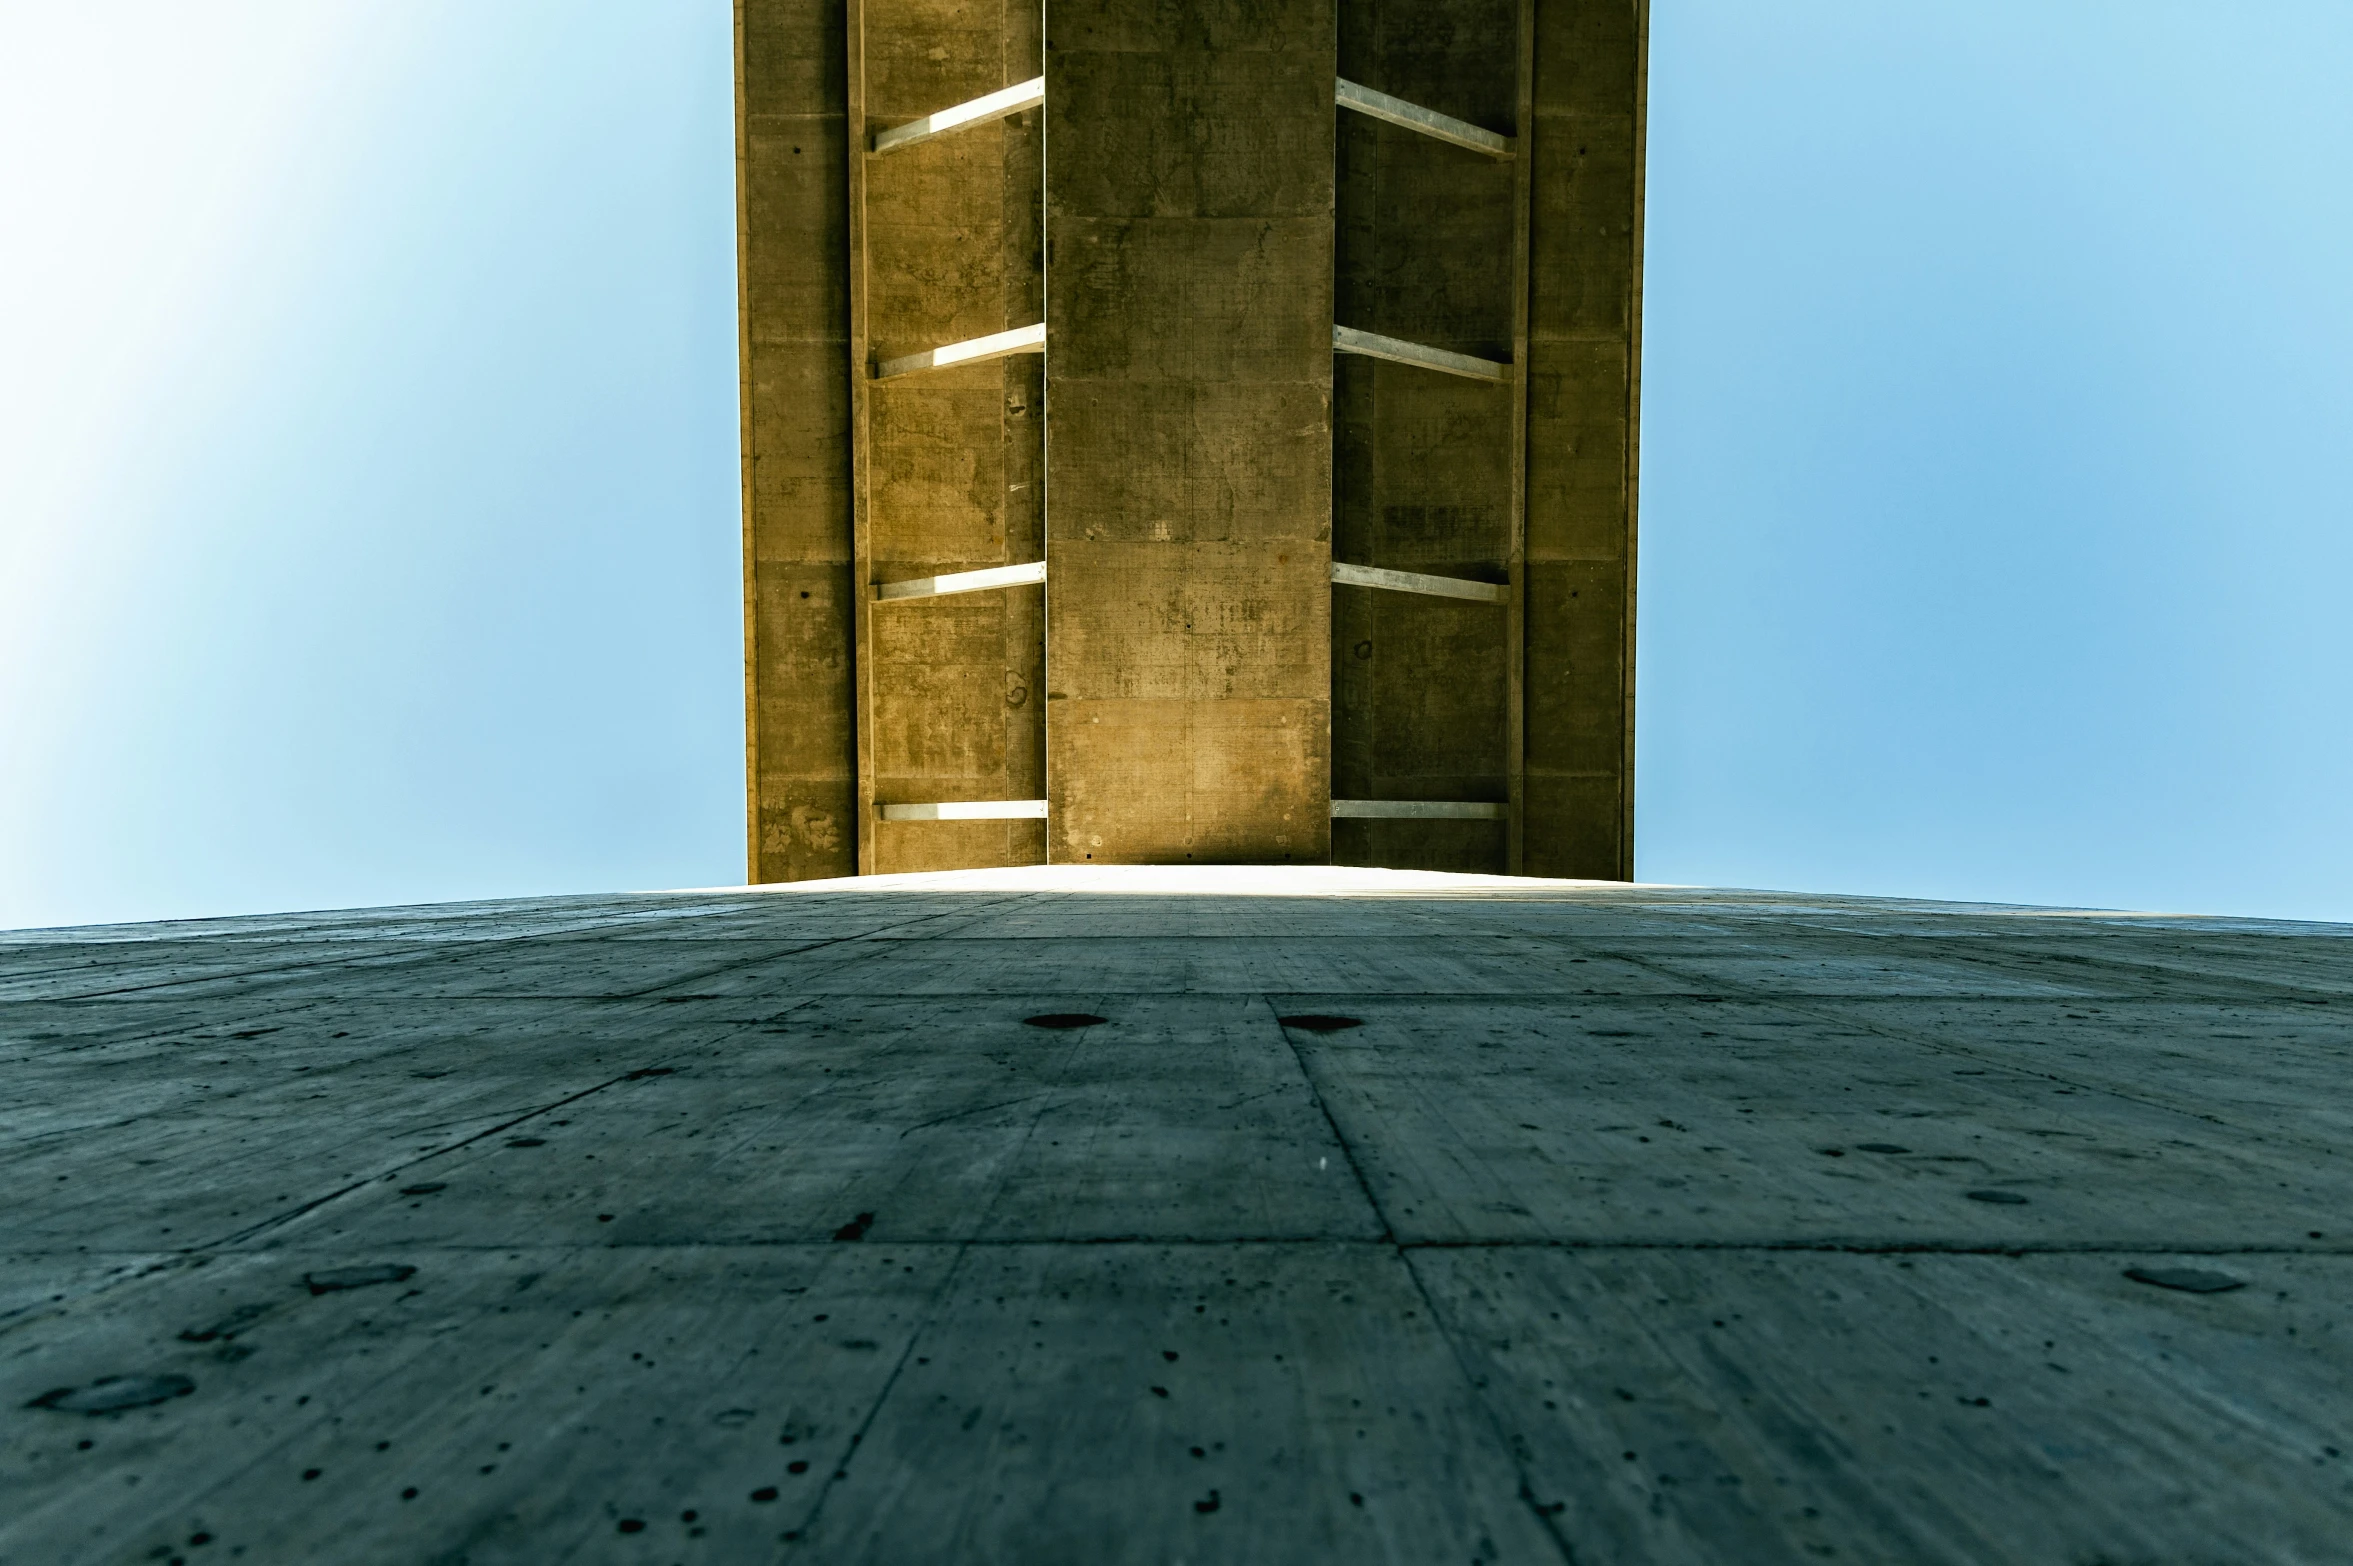 a tall concrete building stands on the roof